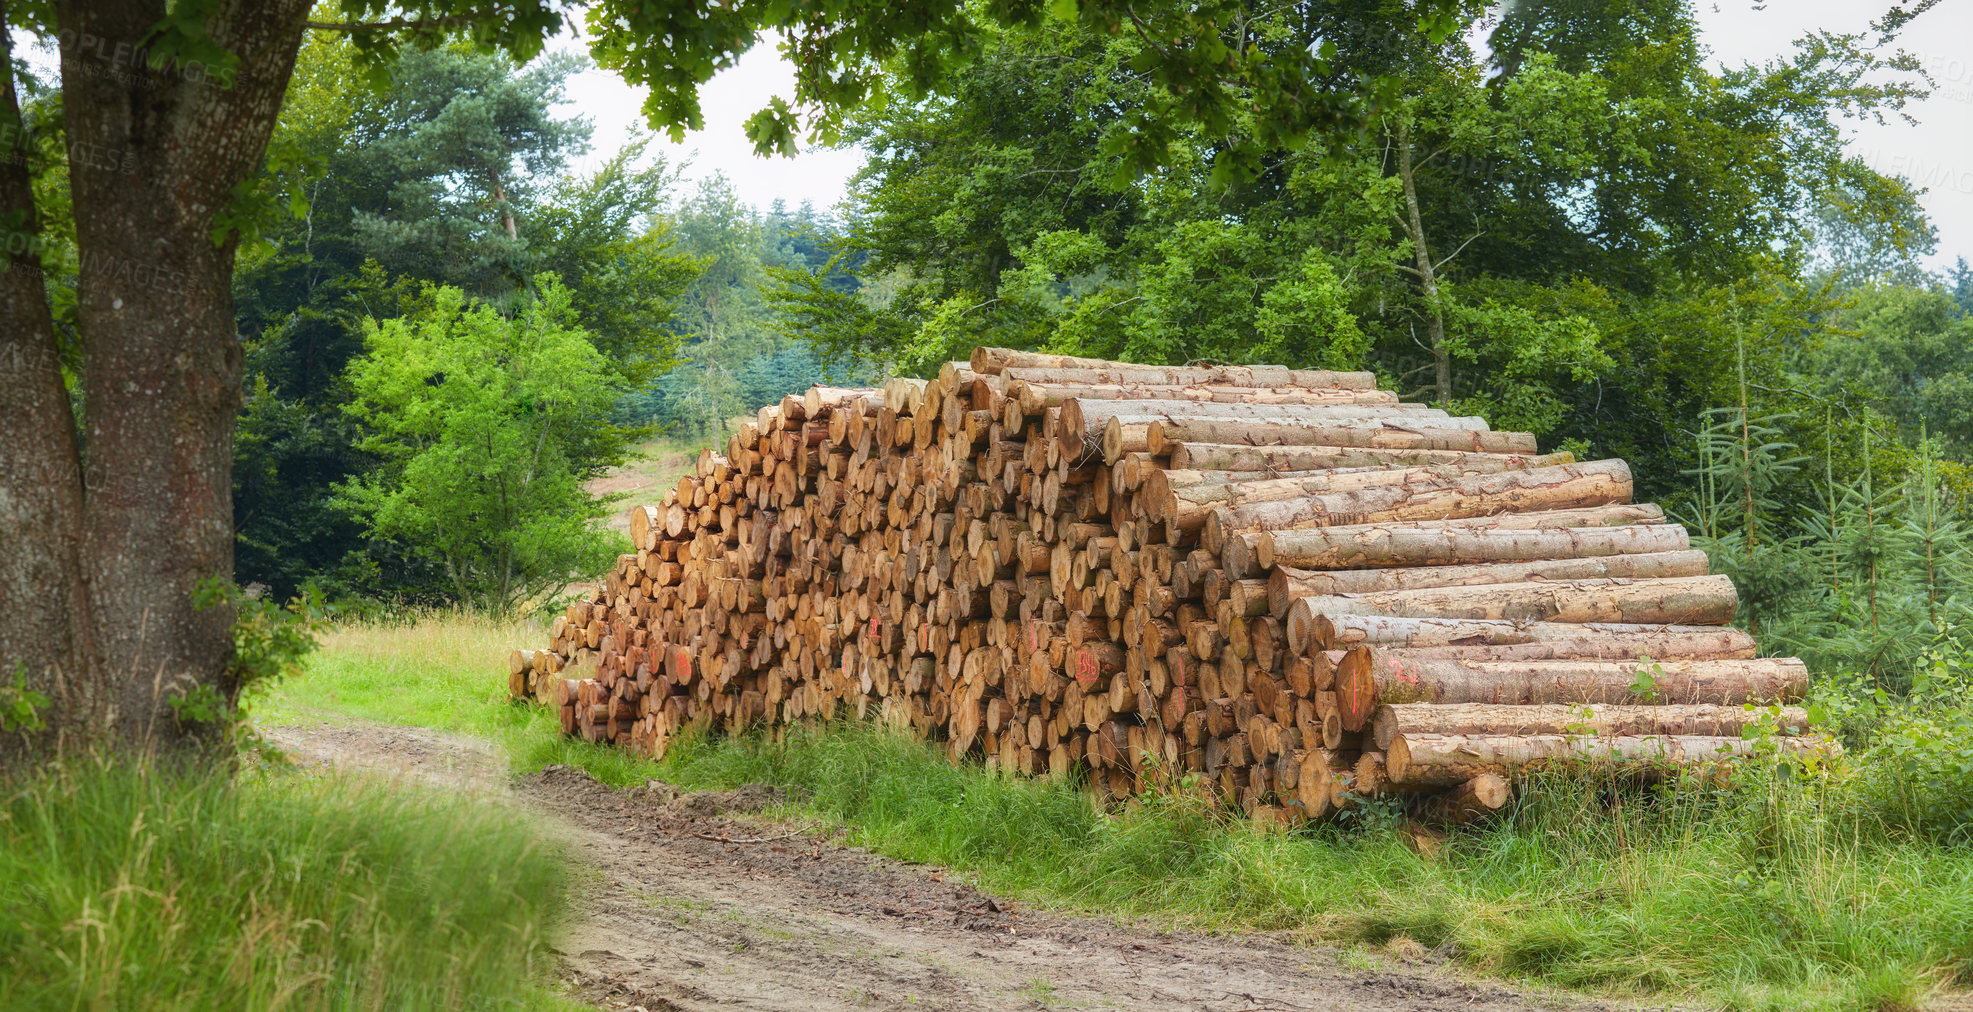 Buy stock photo Chopped tree logs piled in a forest. Collecting big dry stumps of timber and split hardwood material for firewood and the lumber industry. Rustic landscape with deforestation and felling in the woods